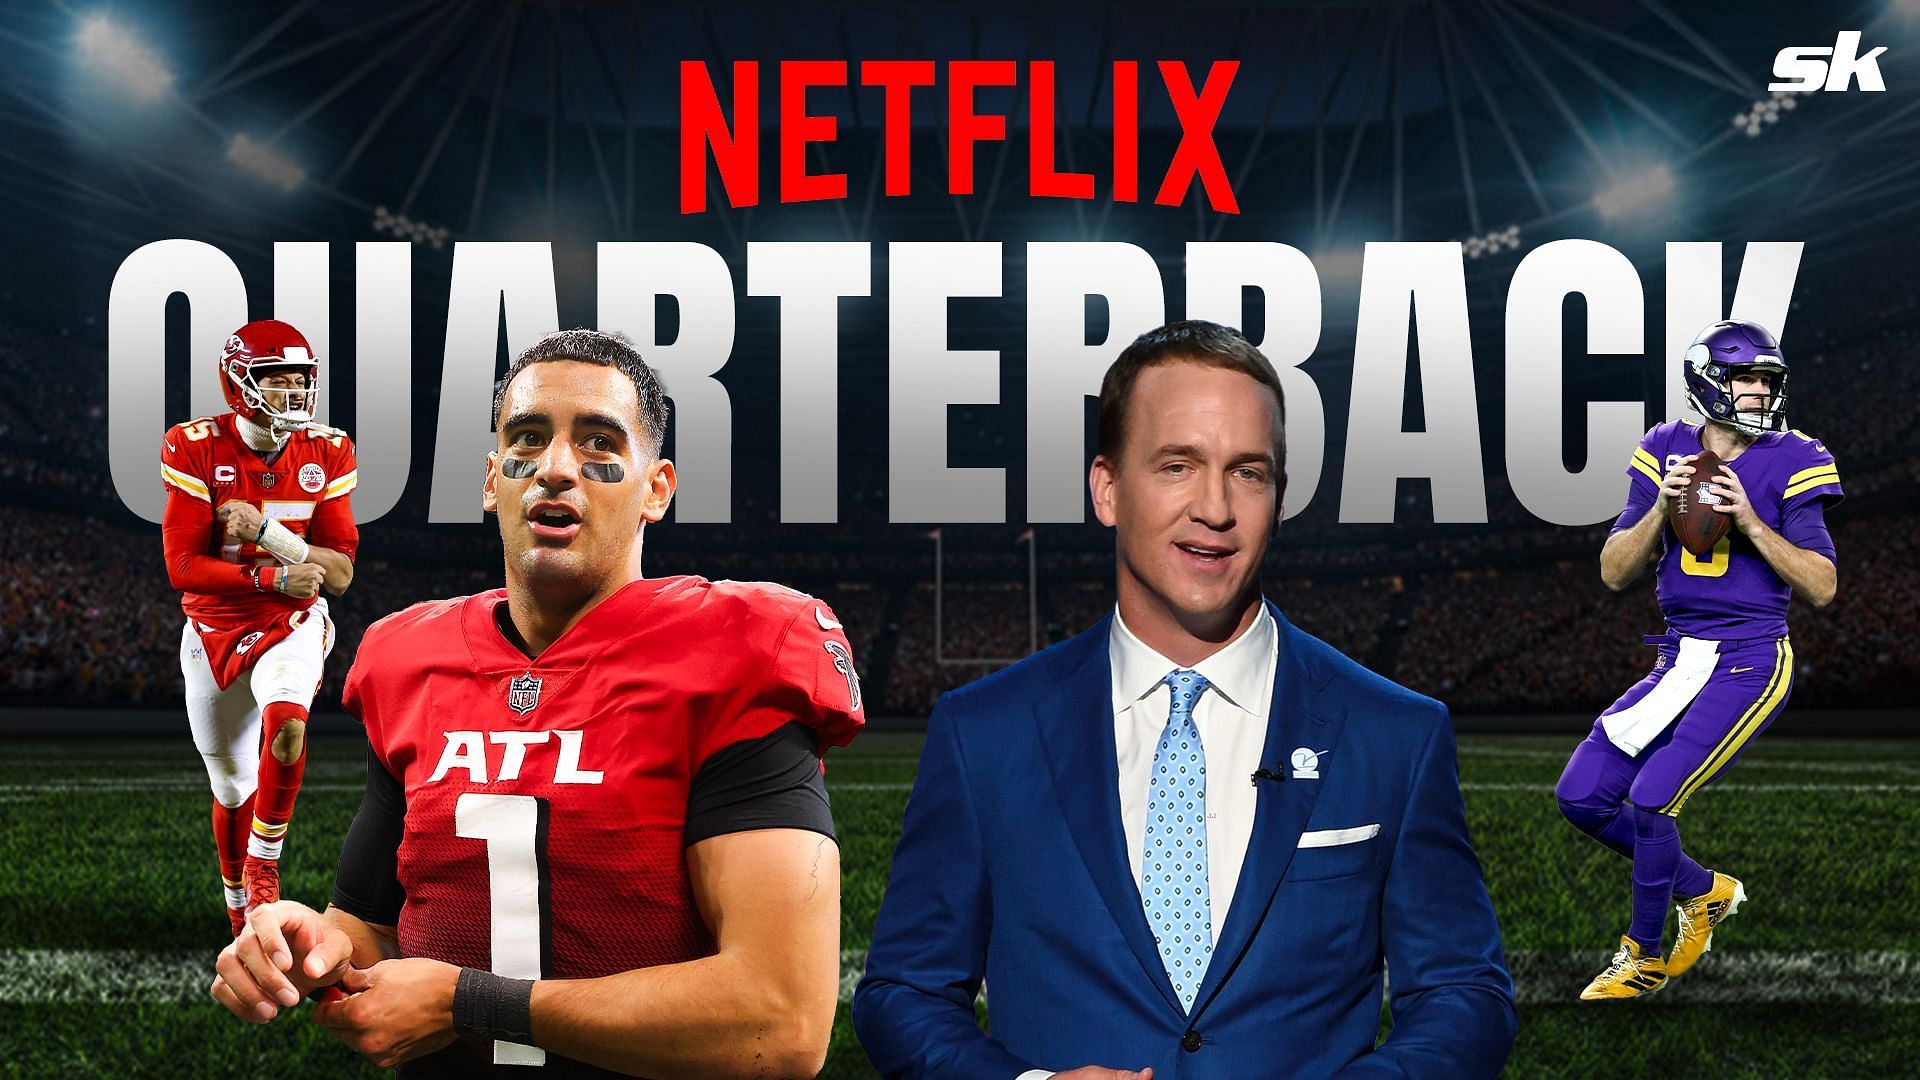 Peyton Manning lauds Marcus Mariota for starring in Netflix's